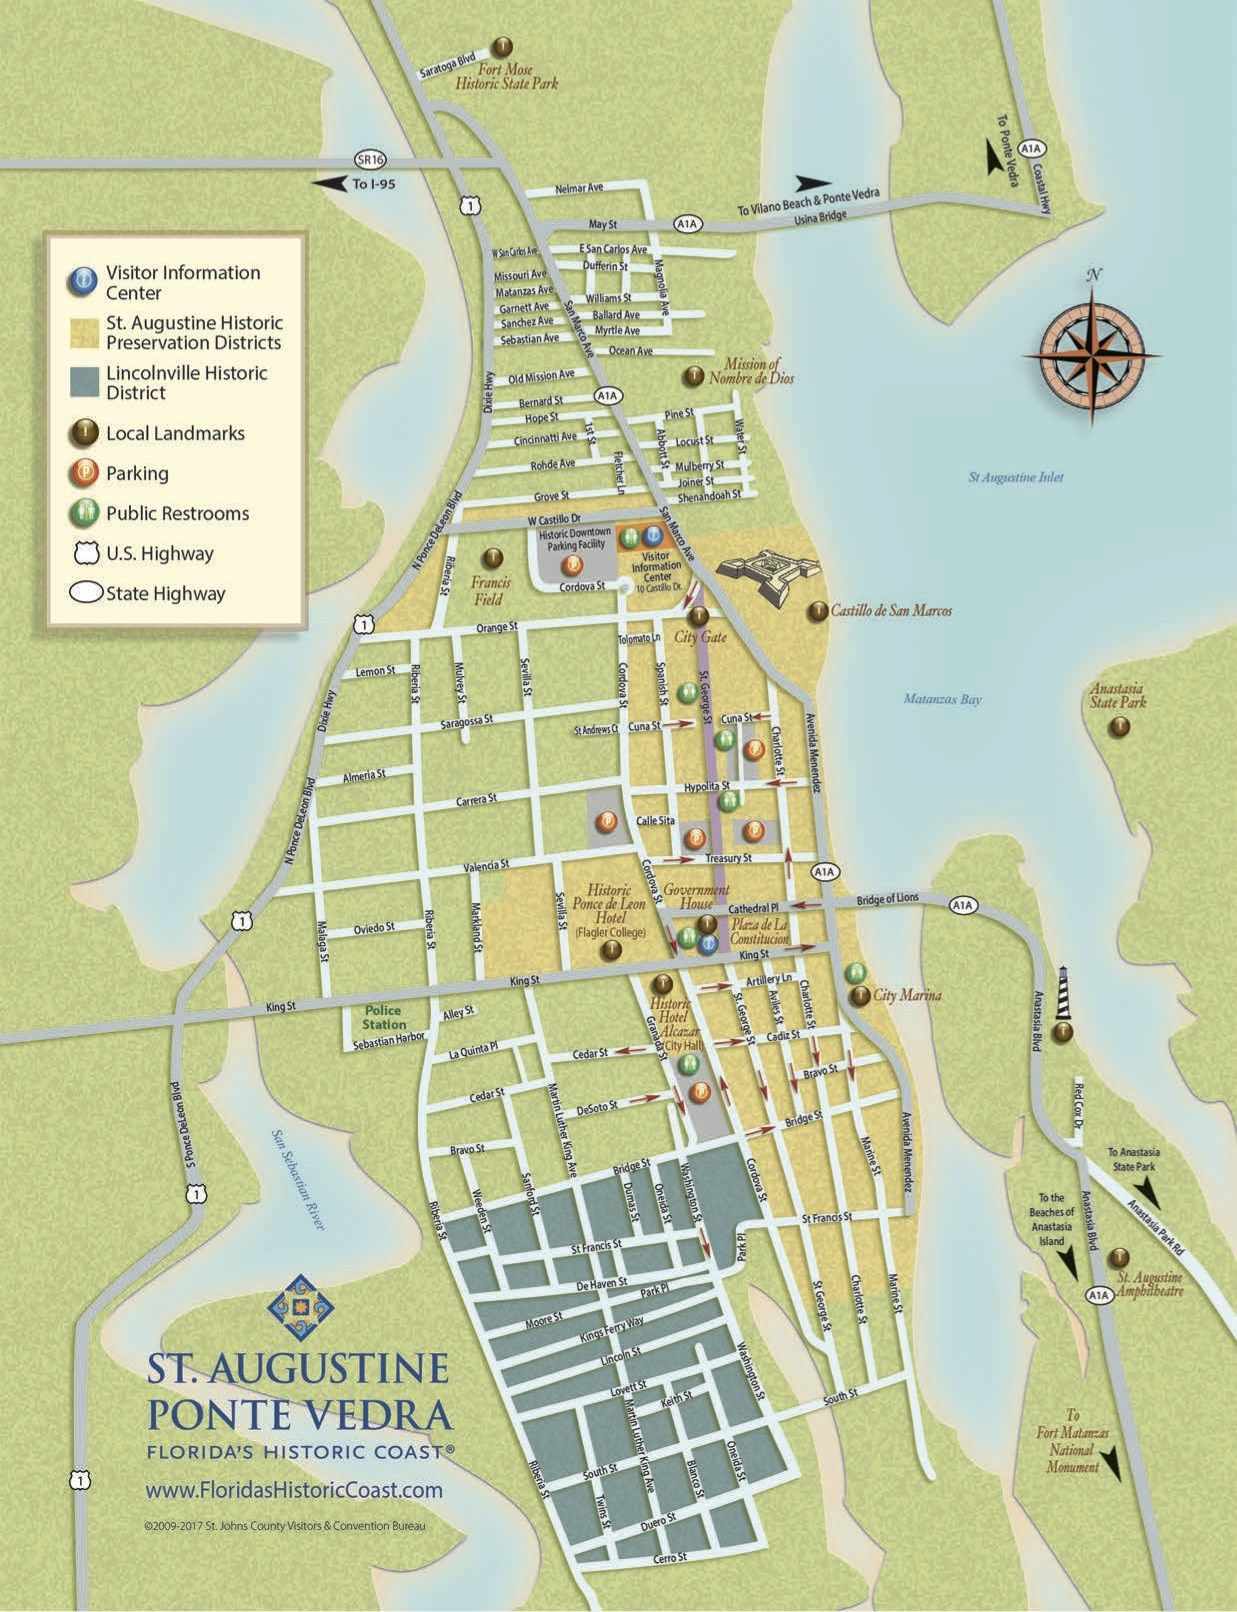 Get To Know Downtown St. Augustine With Our Printable Maps! | St - St Augustine Florida Map Of Attractions